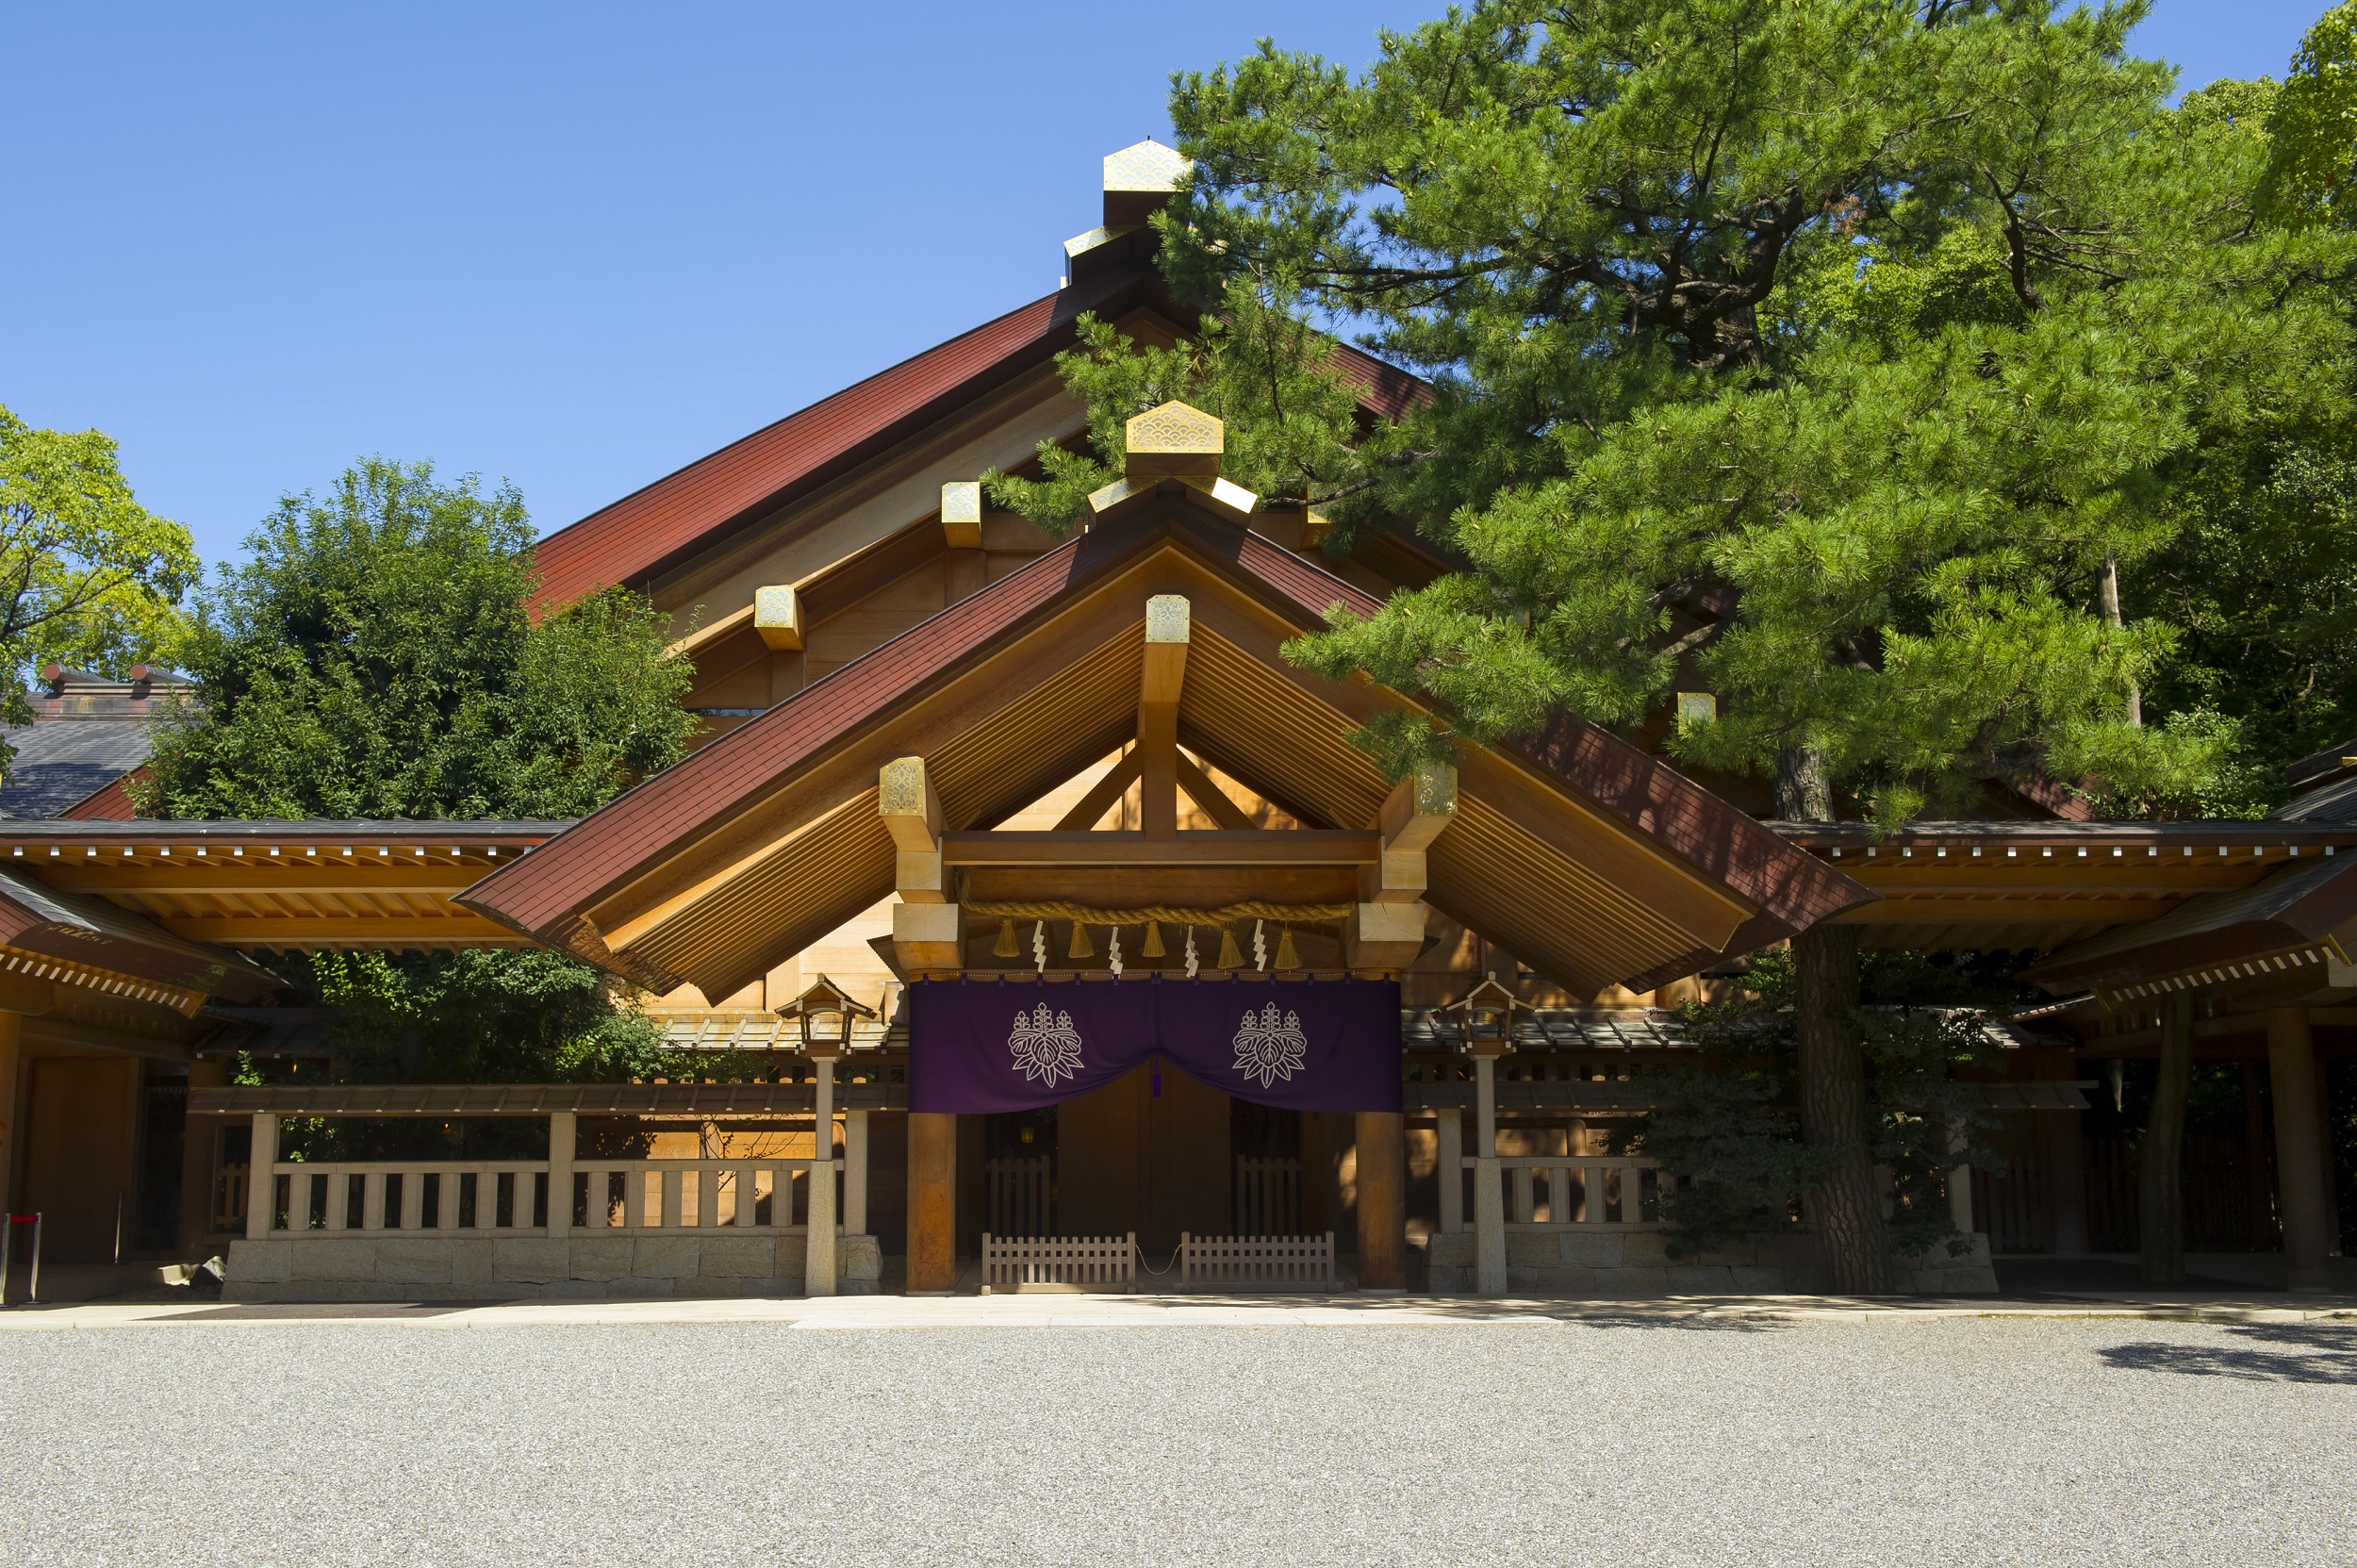 Things to Do in Aichi Prefecture: A Traveler's Guide to Must-See Attractions